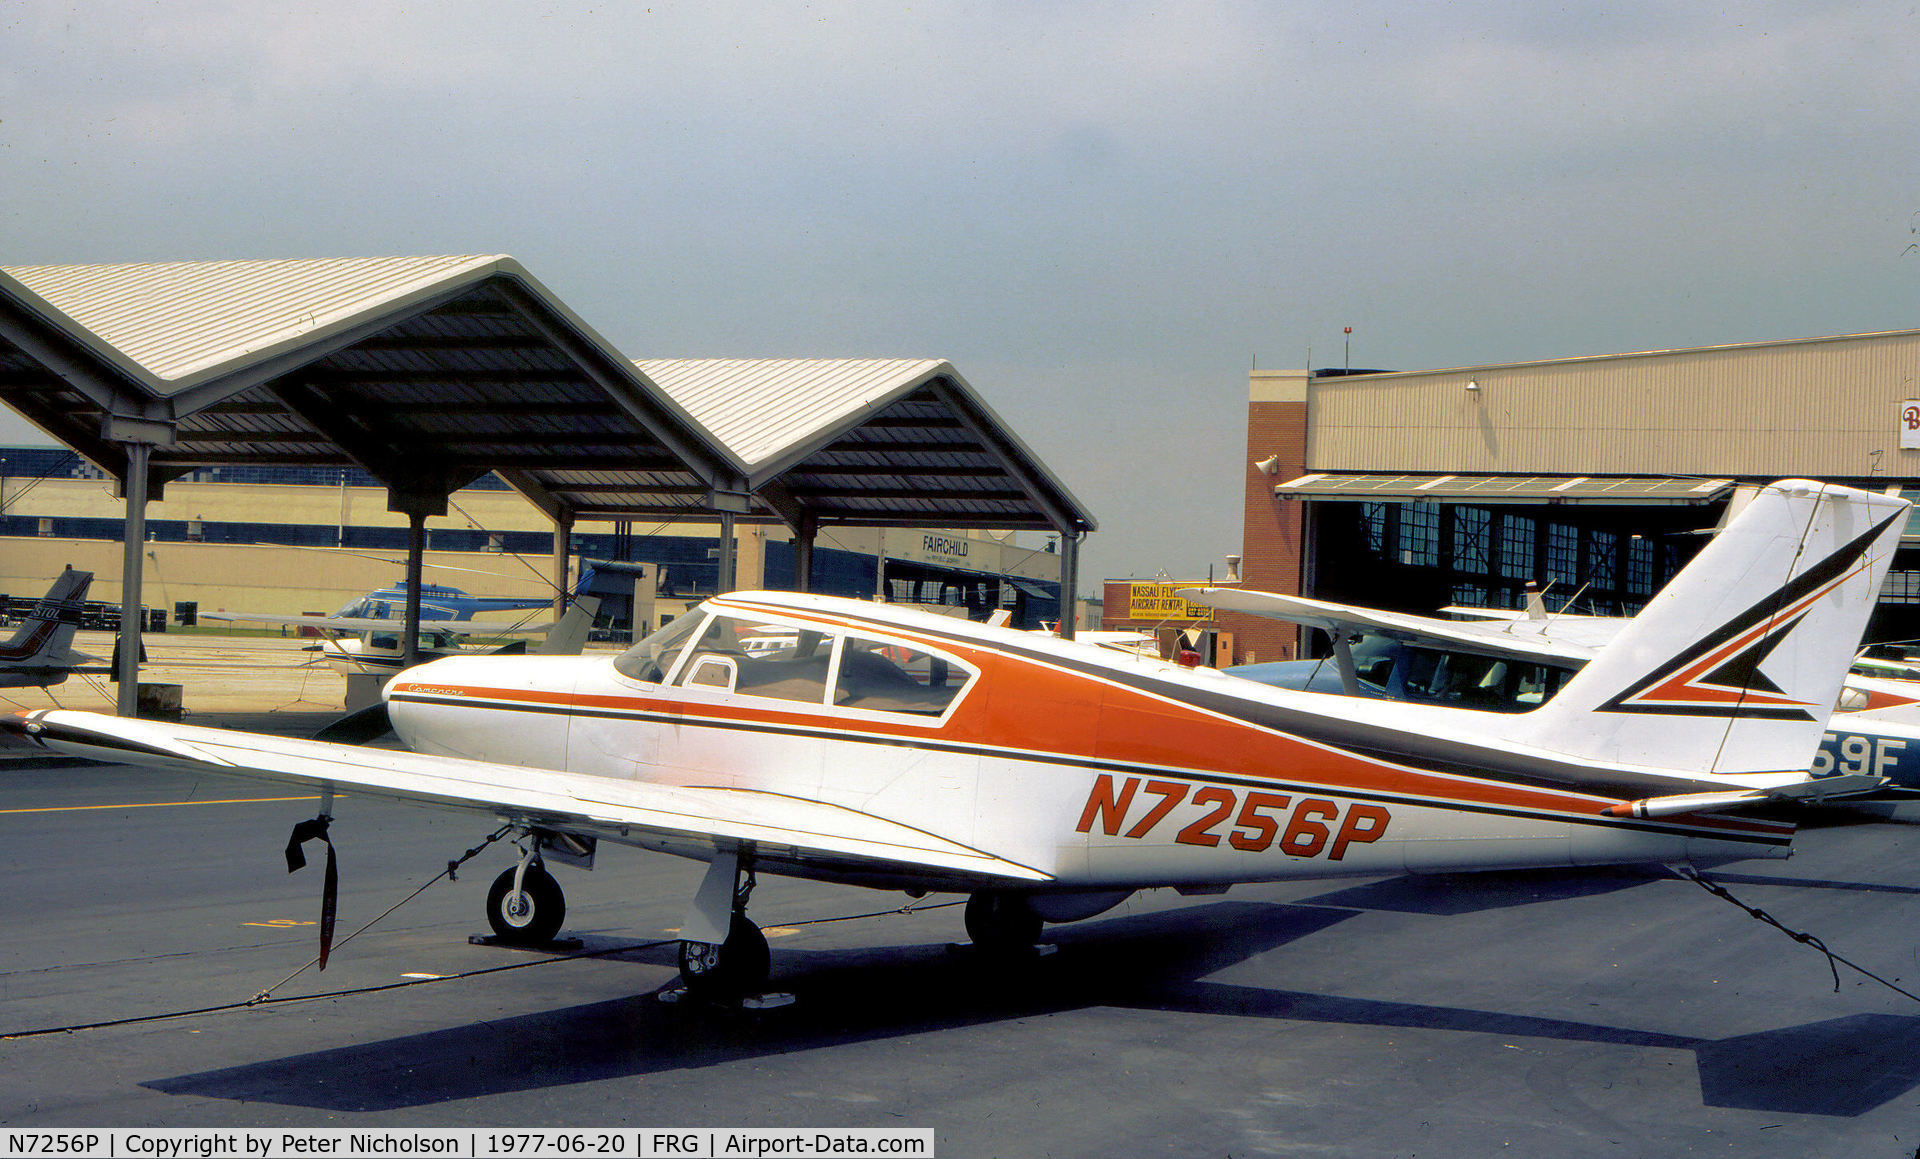 N7256P, Piper PA-24-180 Comanche C/N 242432, PA-24-180 Comanche resident at Republic Airport on Long Island in the Summer of 1977.